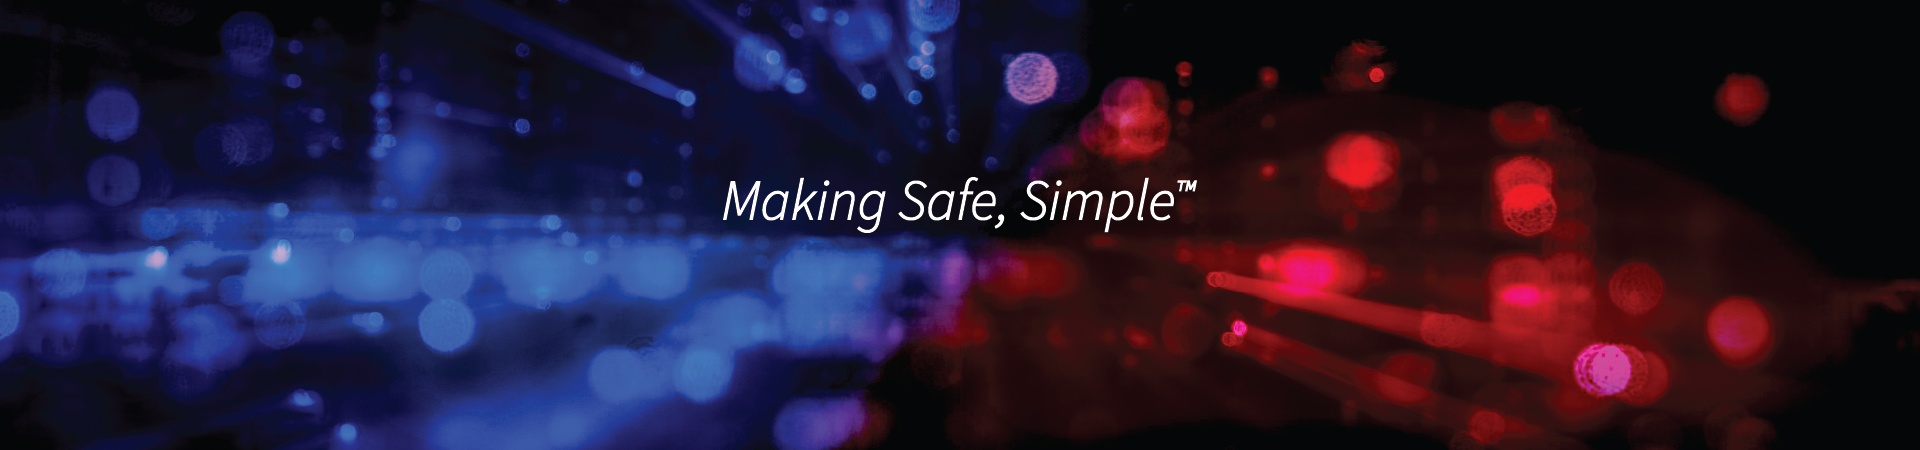 Welcome to the Making Safe, Simple blog